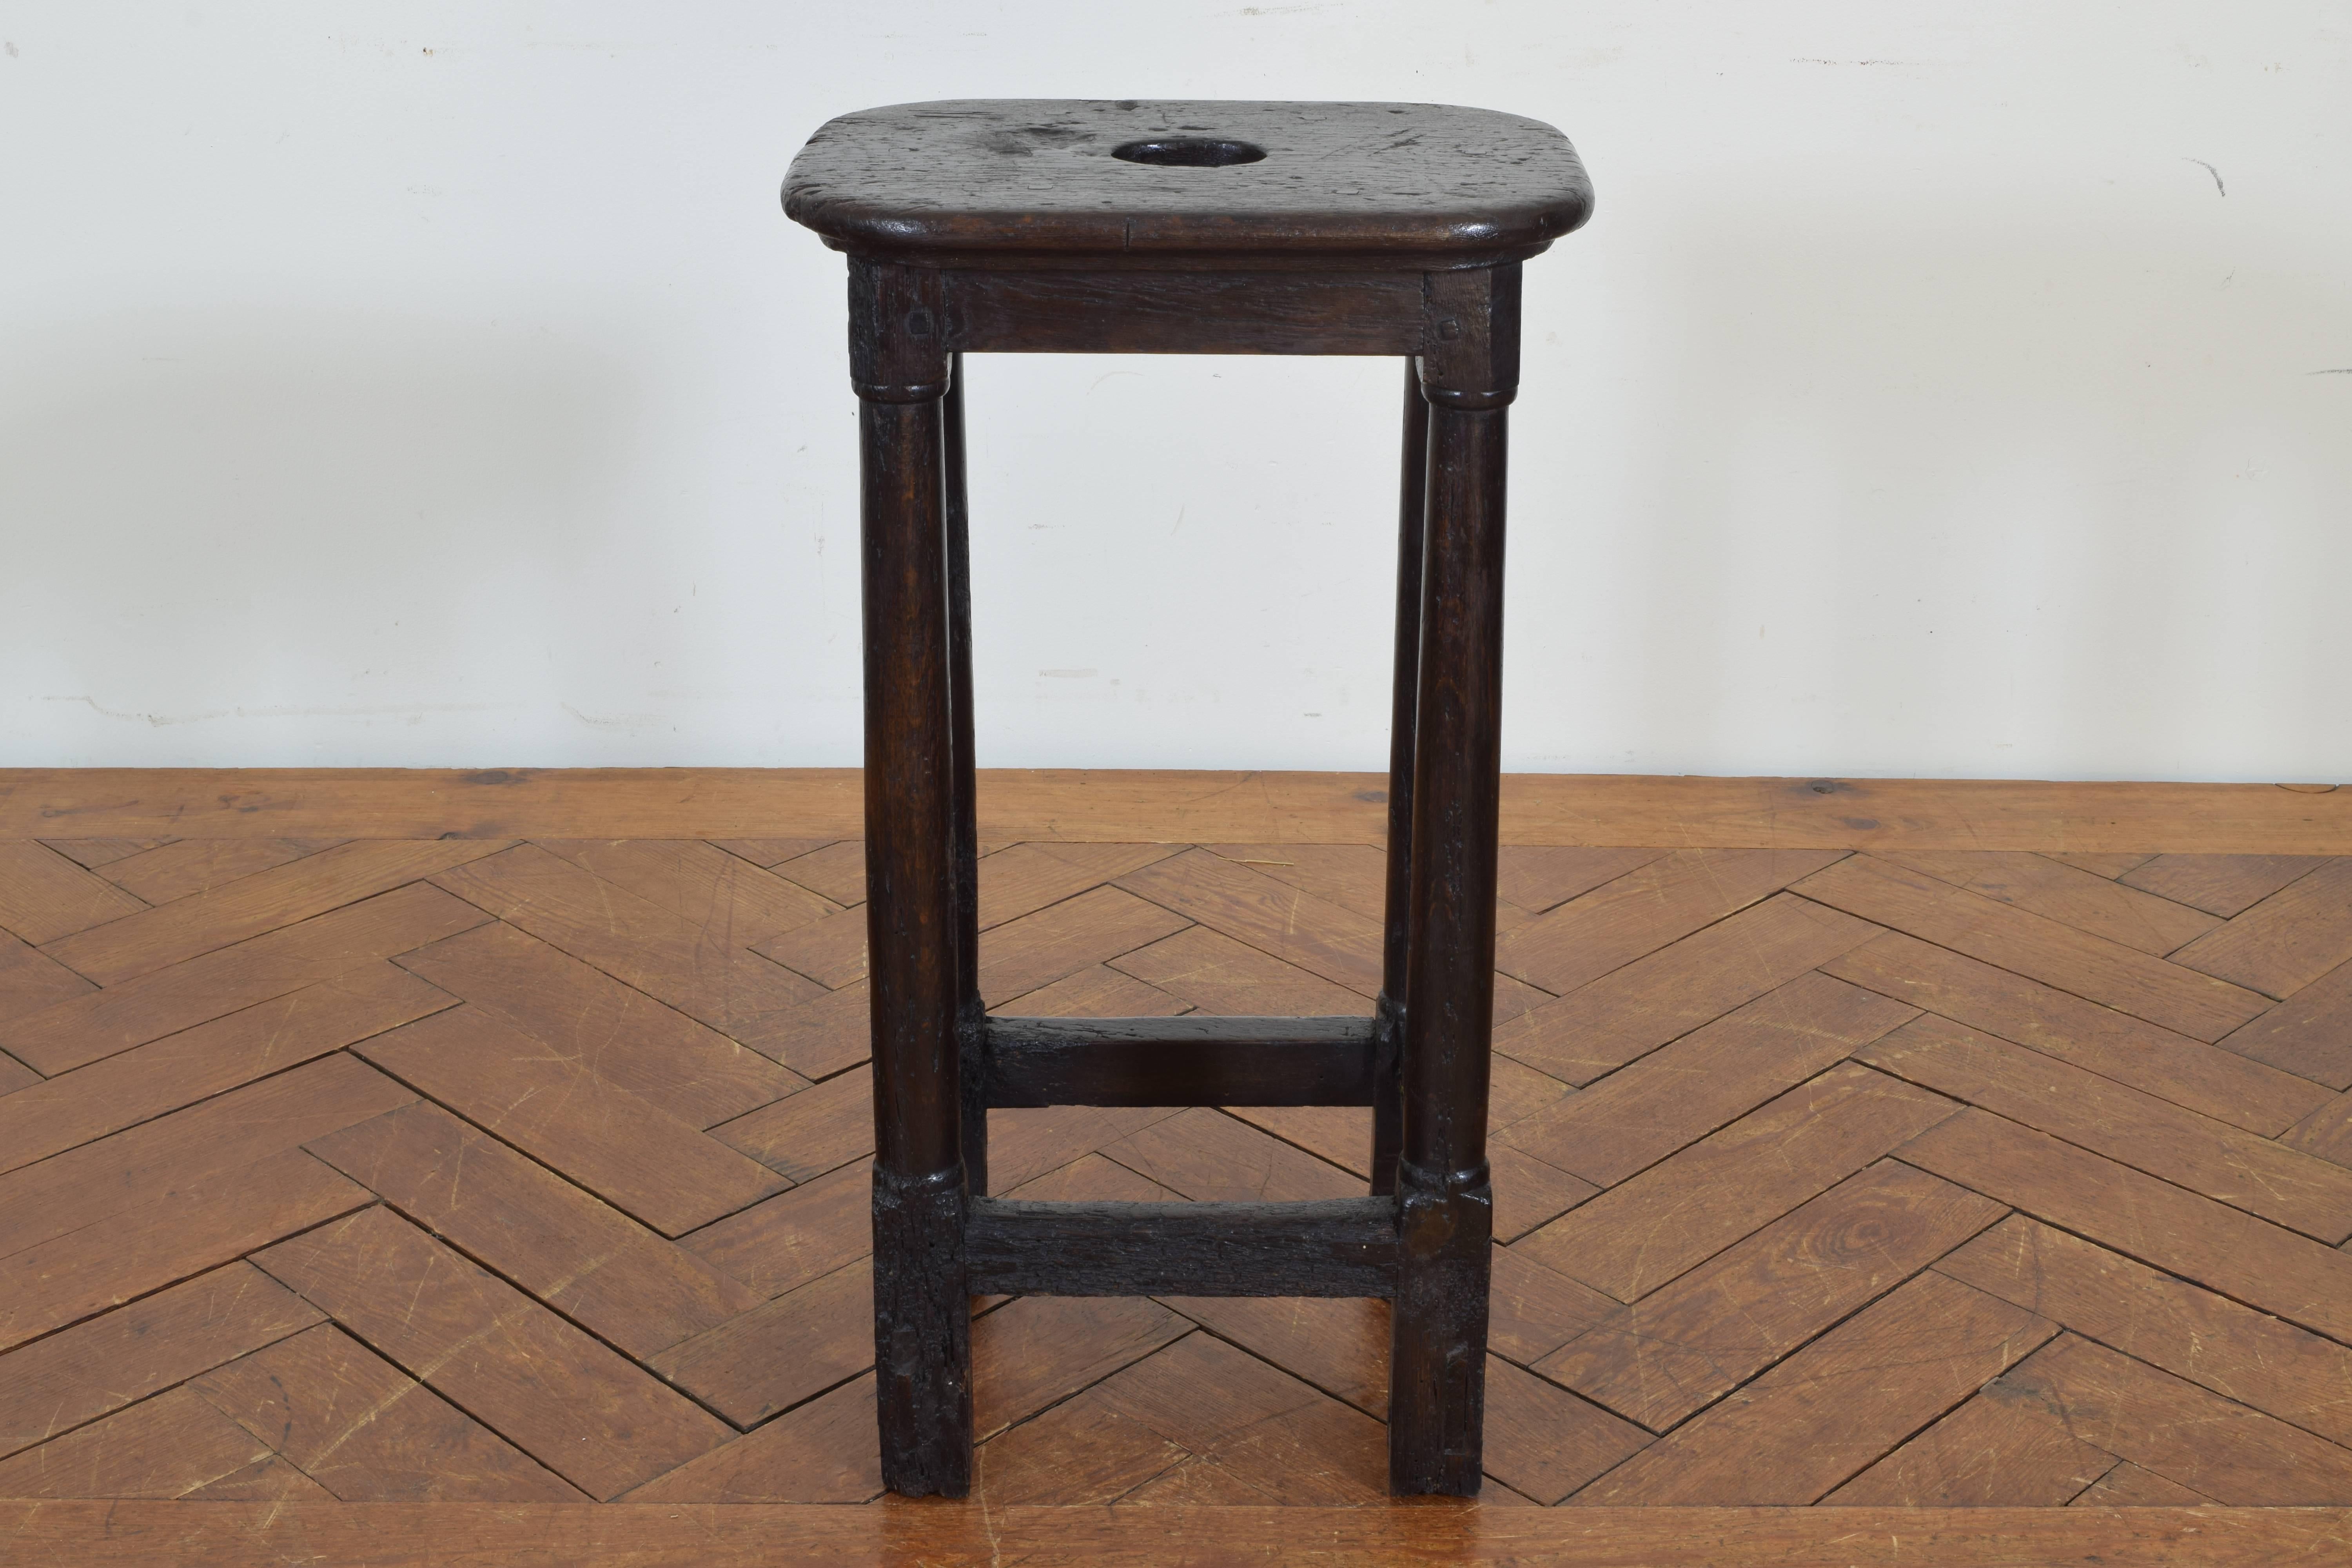 Made from oak with pegged construction. The legs are joined by a stretcher, the top having a carved hole used for handling.